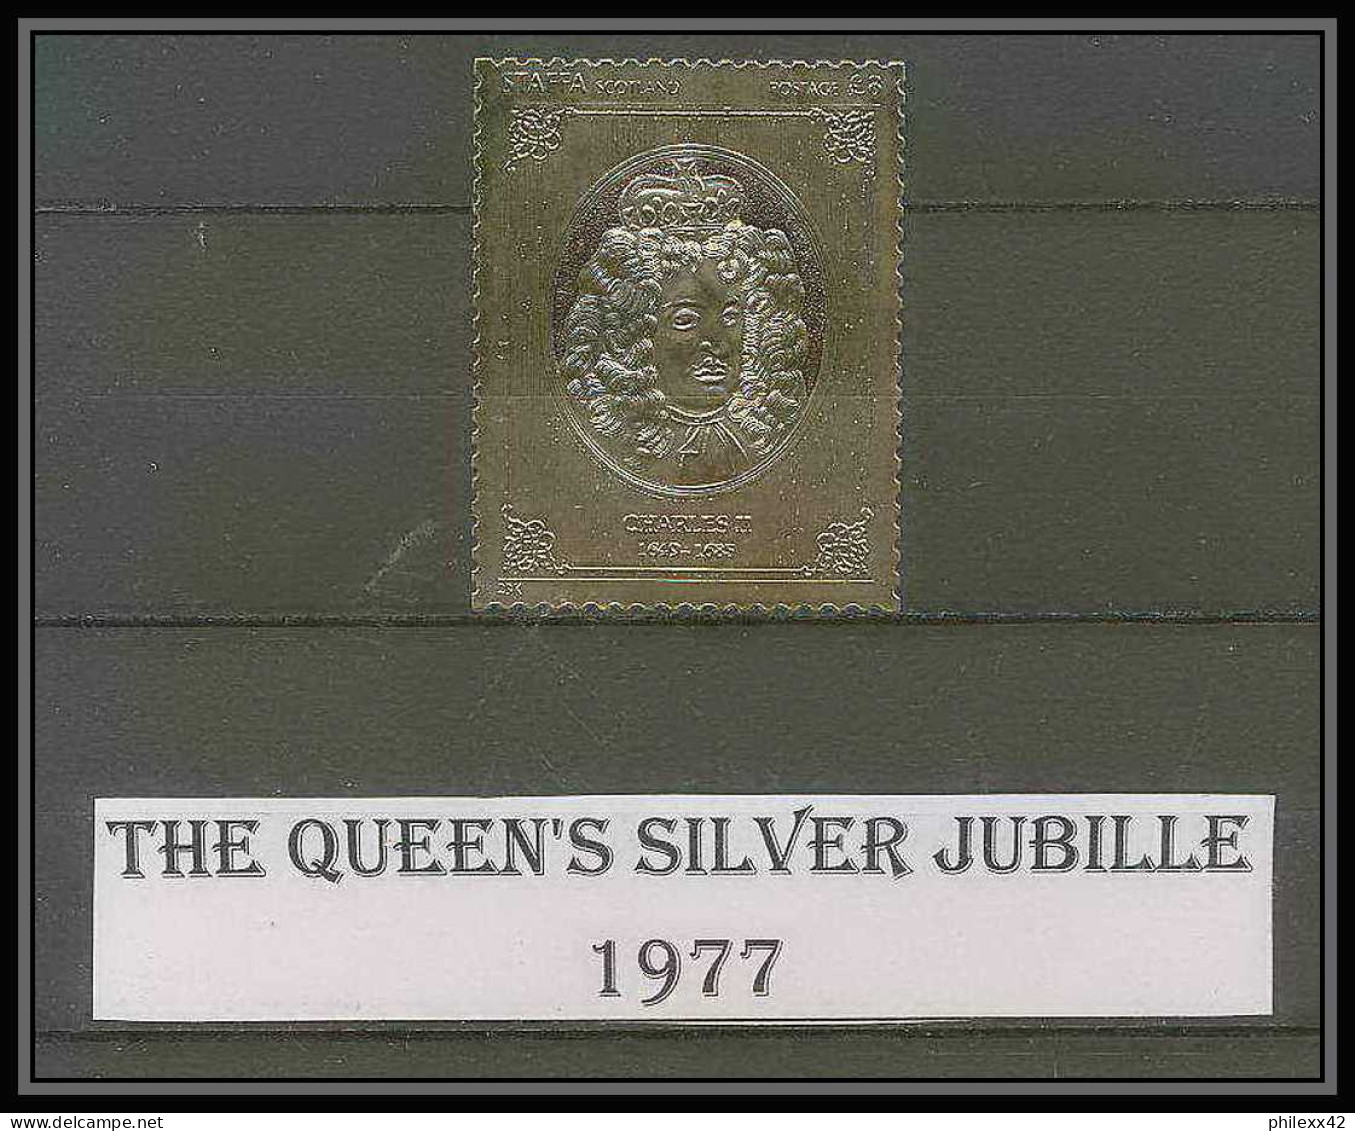 461 Staffa Scotland The Queen's Silver Jubilee 1977 OR Gold Stamps Monarchy United Kingdom Charles 2 Type 1 Neuf** Mnh - Ortsausgaben